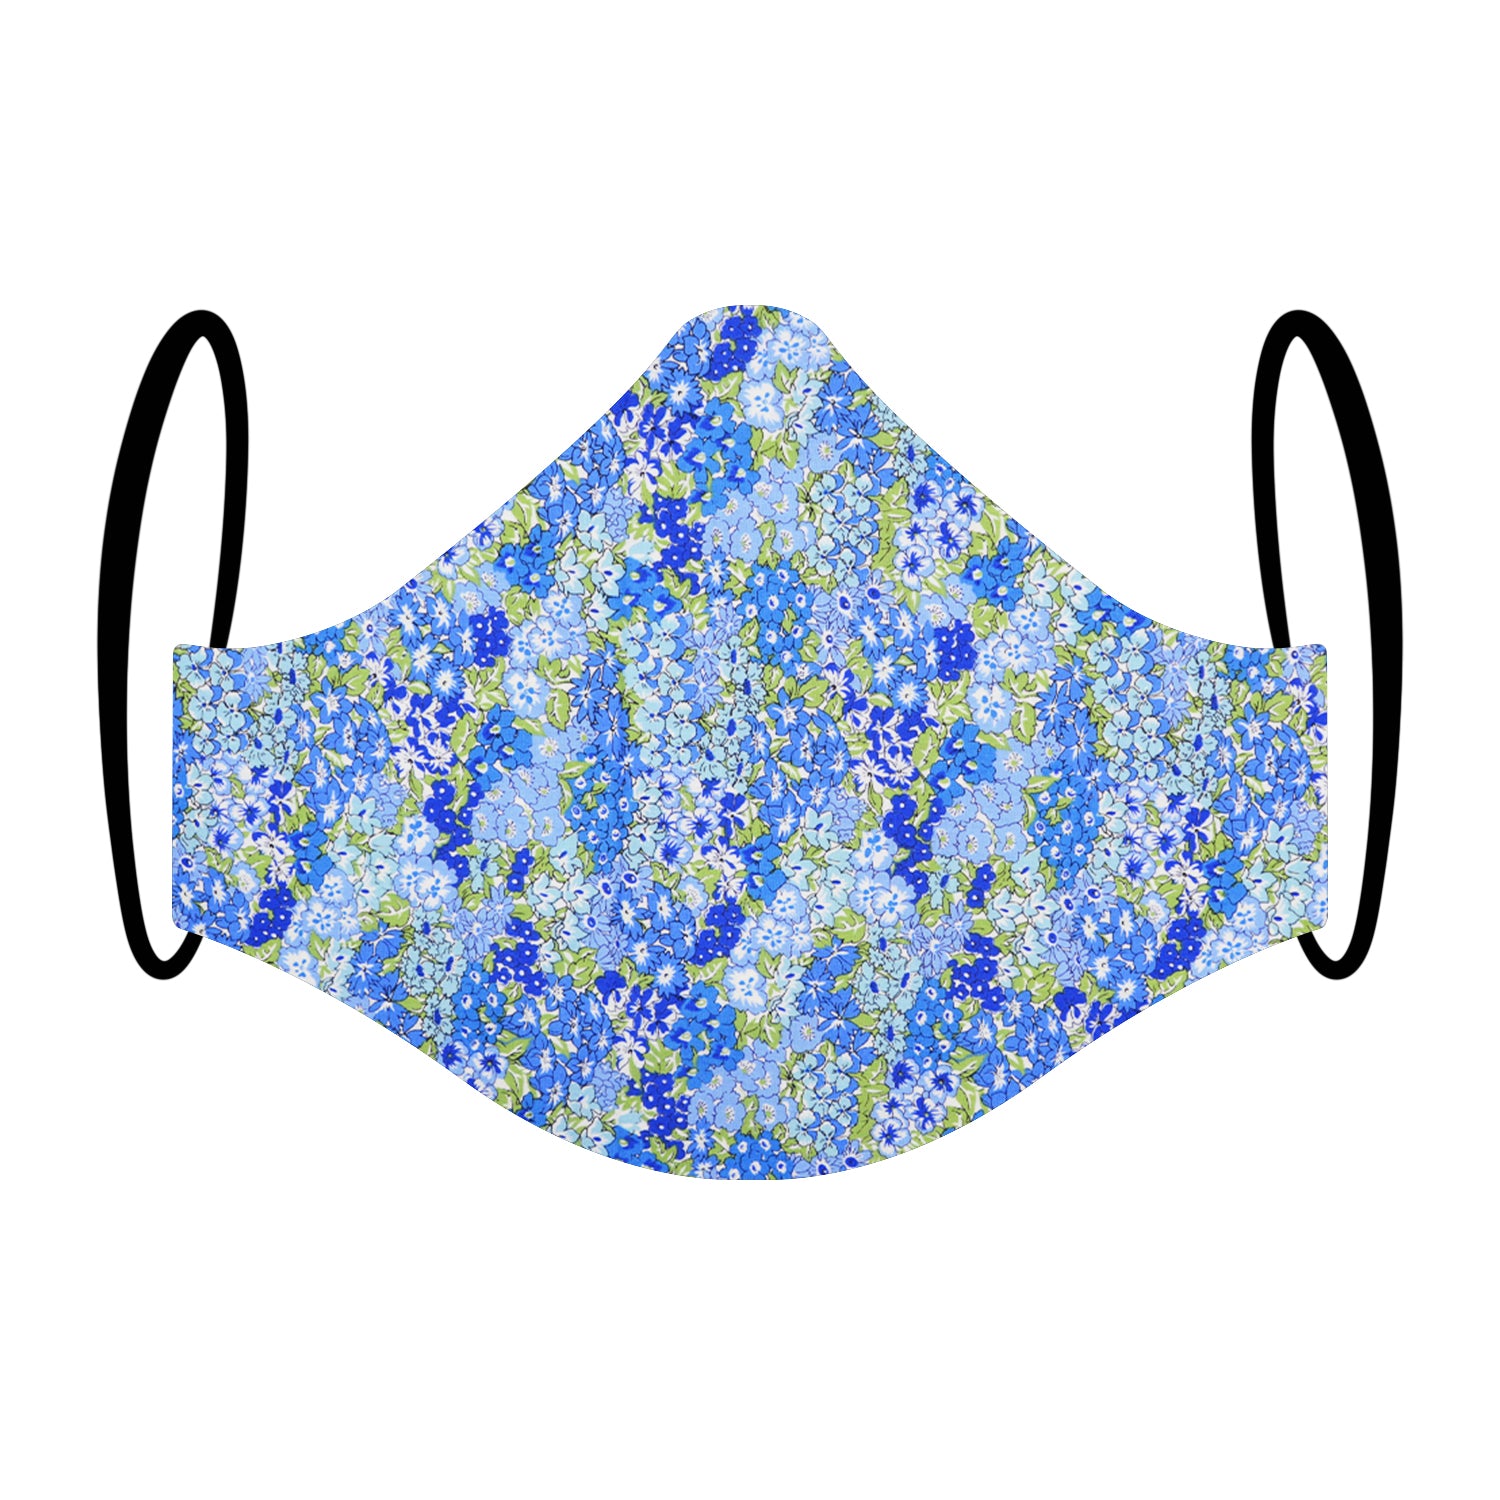 "Bluebell Woods" Floral Face Mask featuring Liberty London Fabric Triple-layer Washable {Limited Edition}